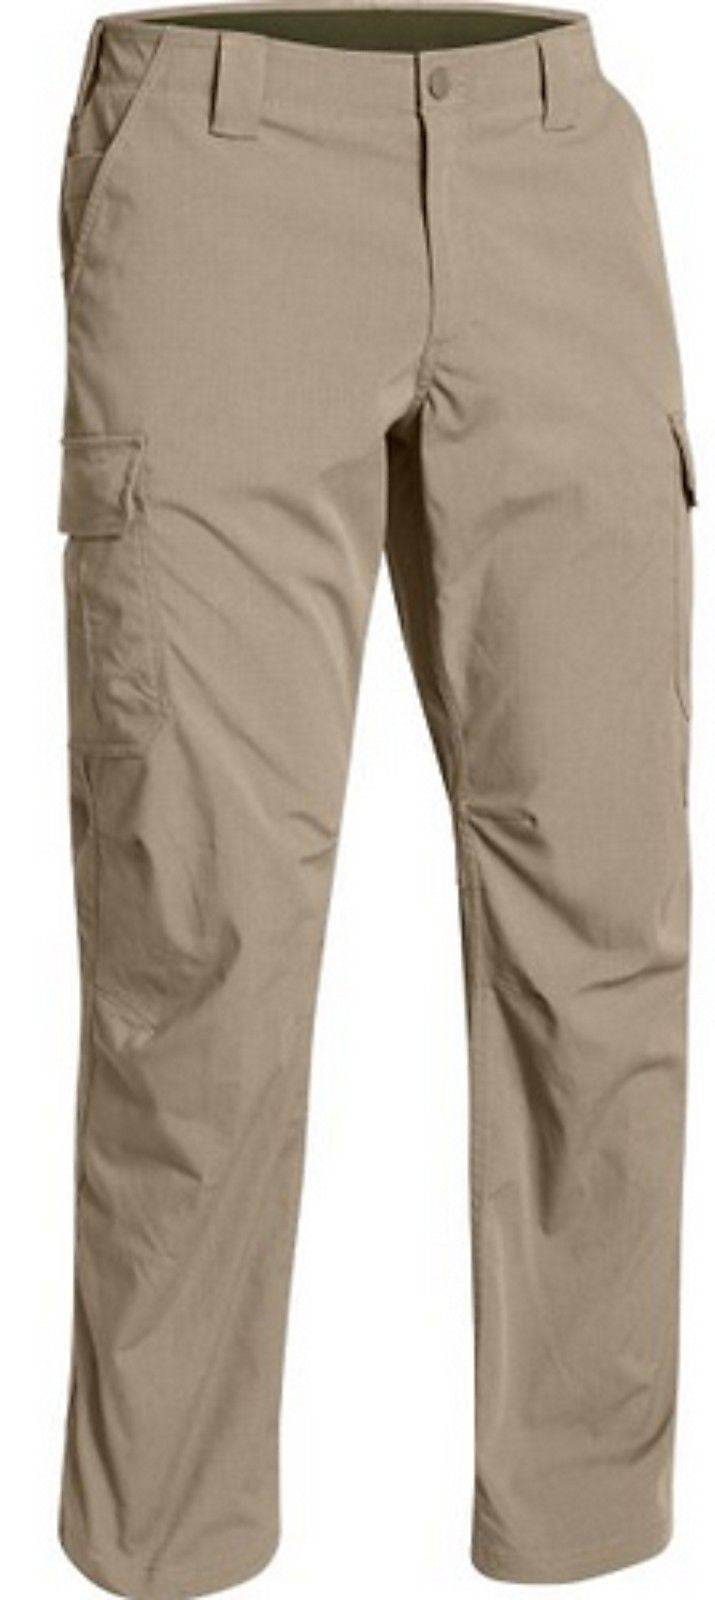 Under Armour Tactical Patrol Pants II - Conceal Carry Field Duty Cargo –  Grunt Force